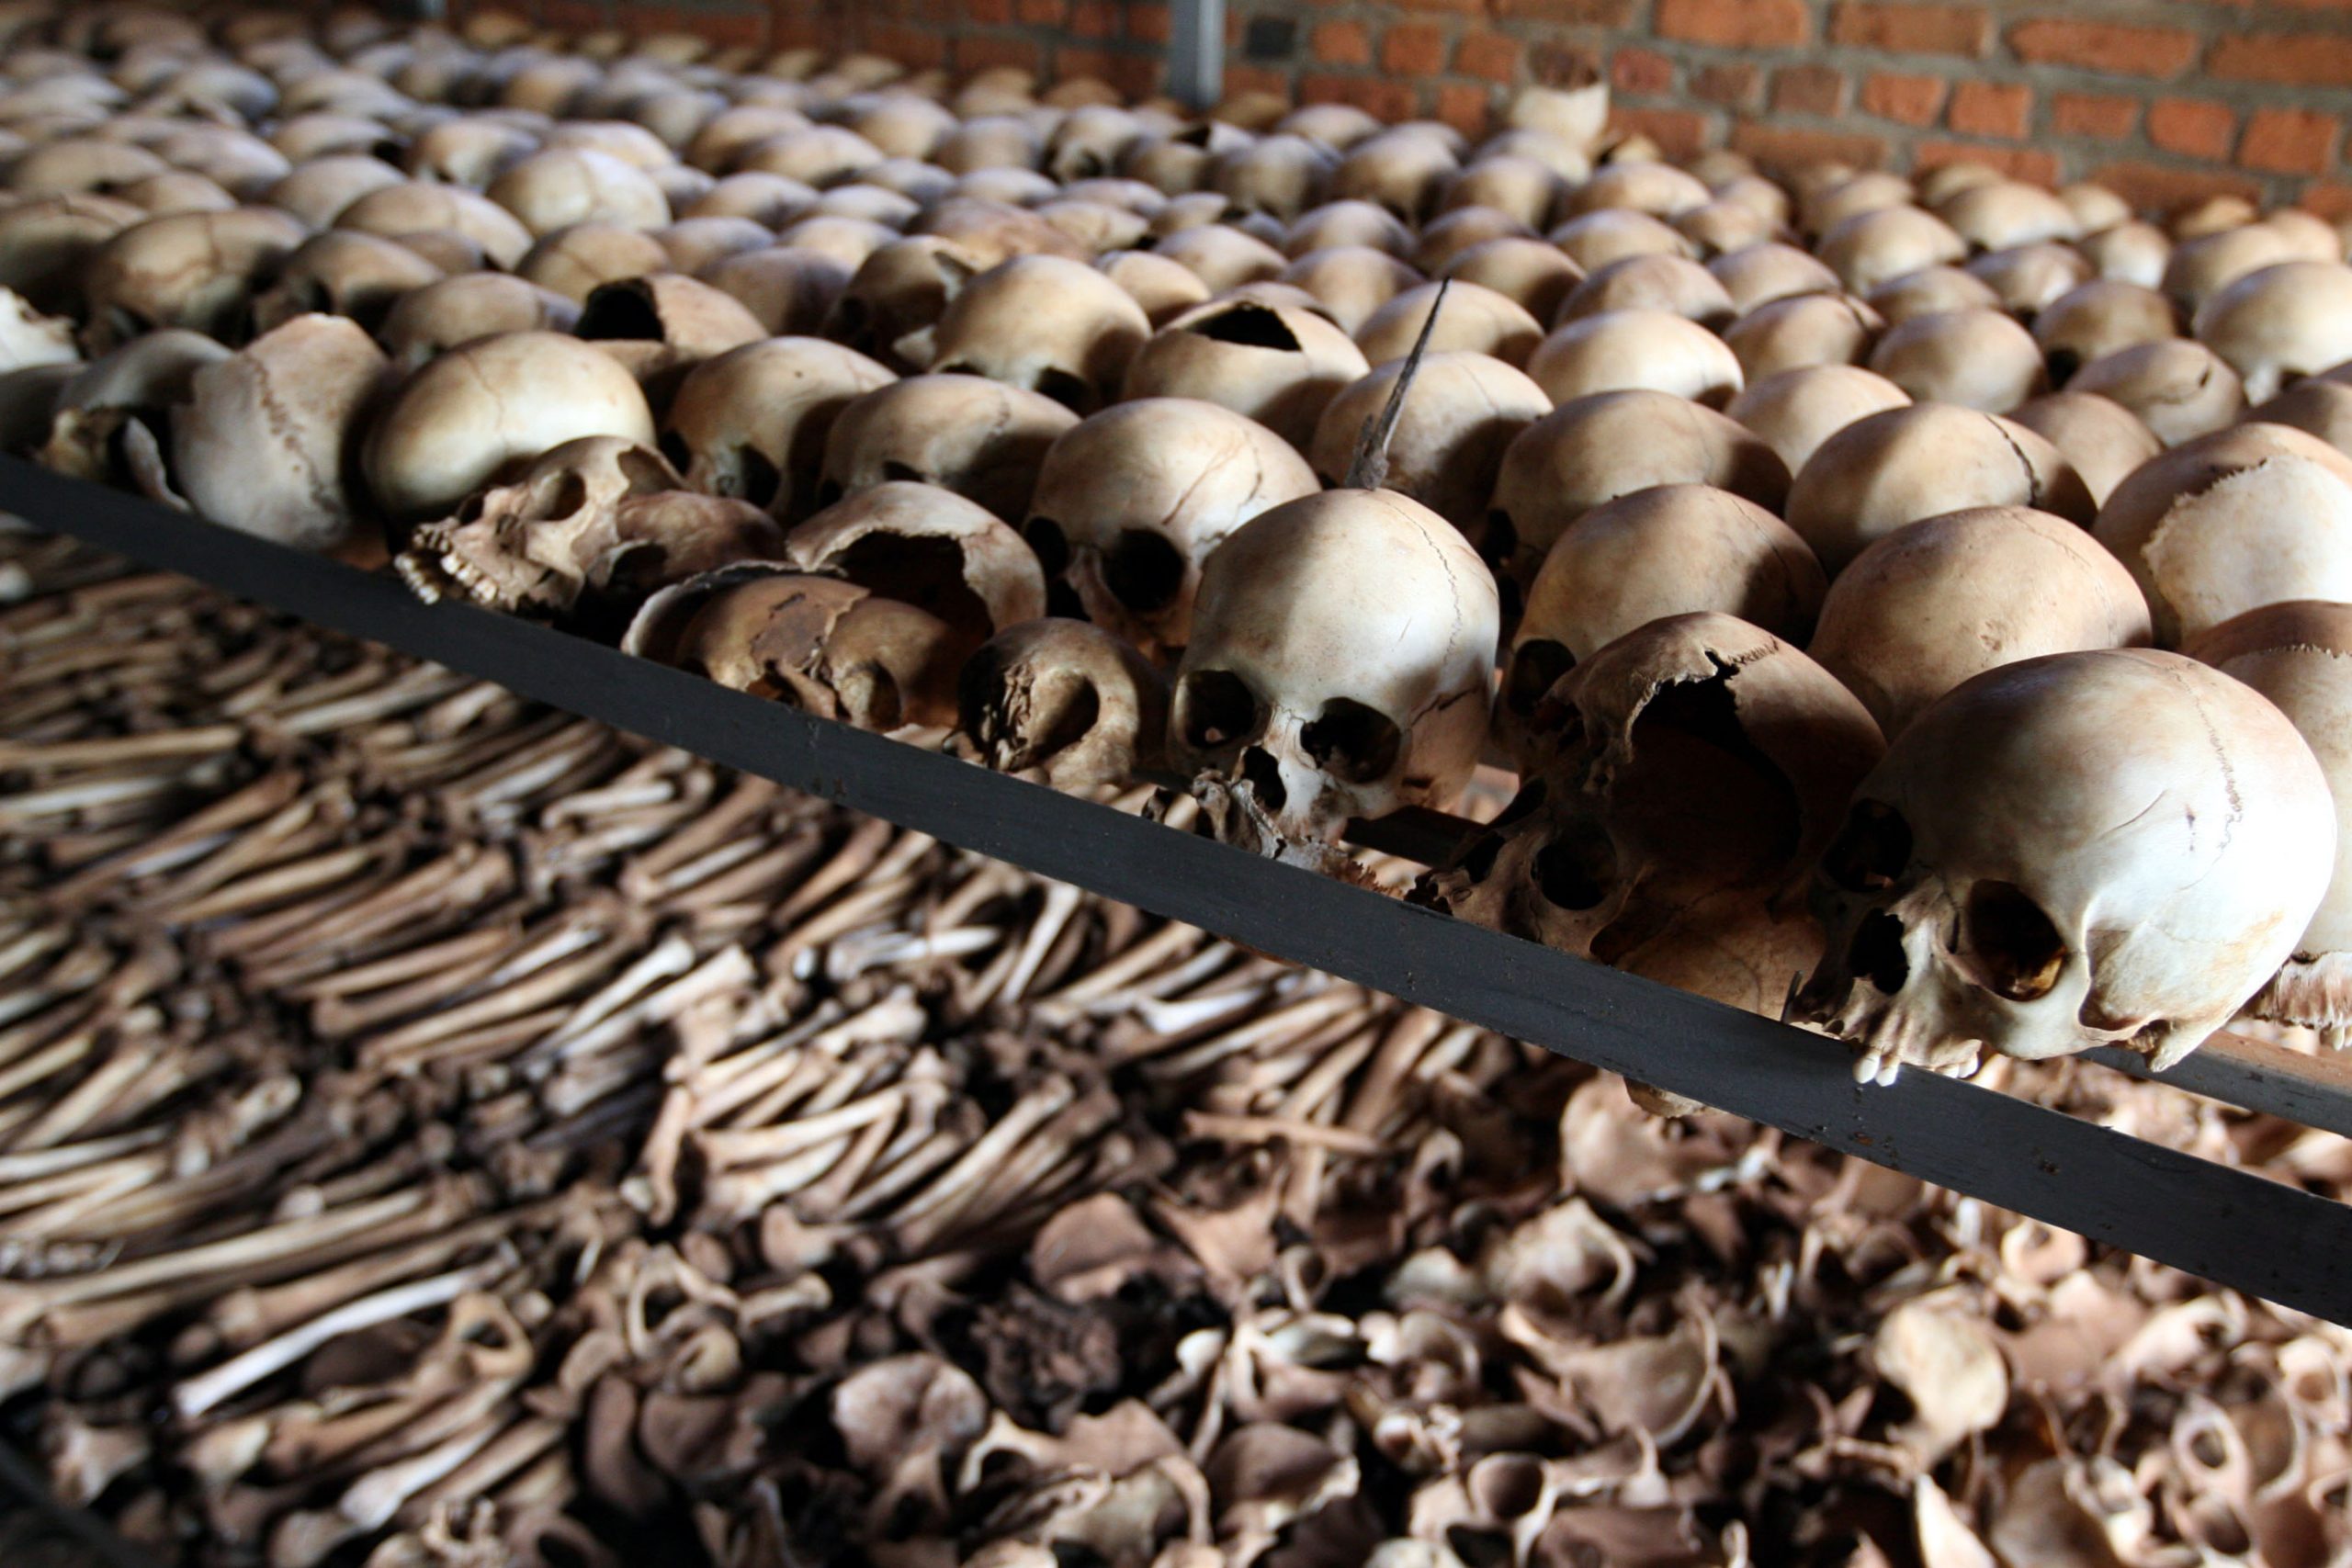 collection of skulls and bones from people killed in the Rwandan genocide